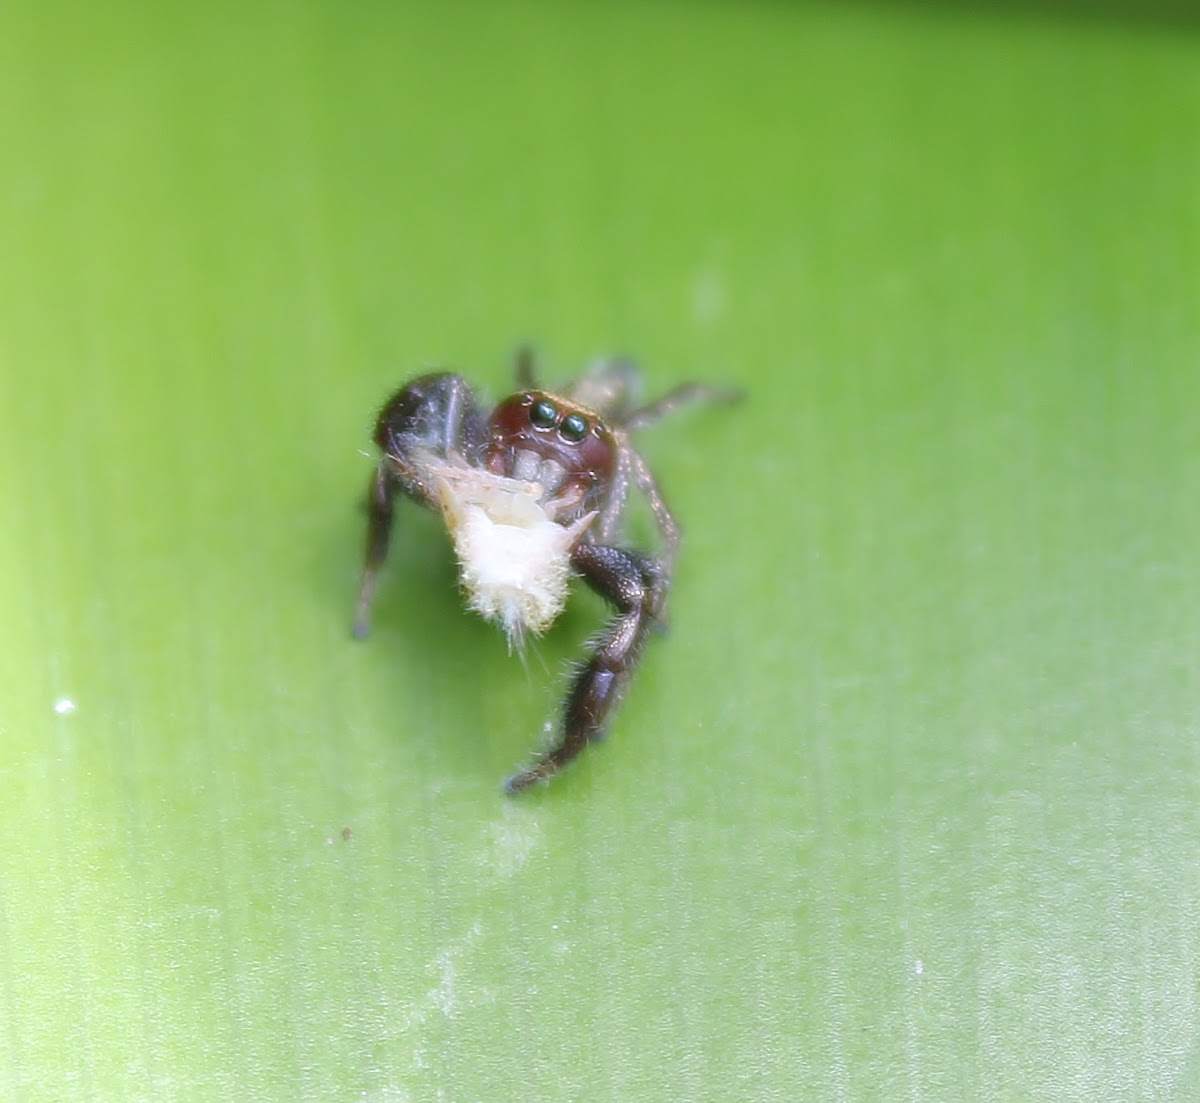 Jumping Spider - Male